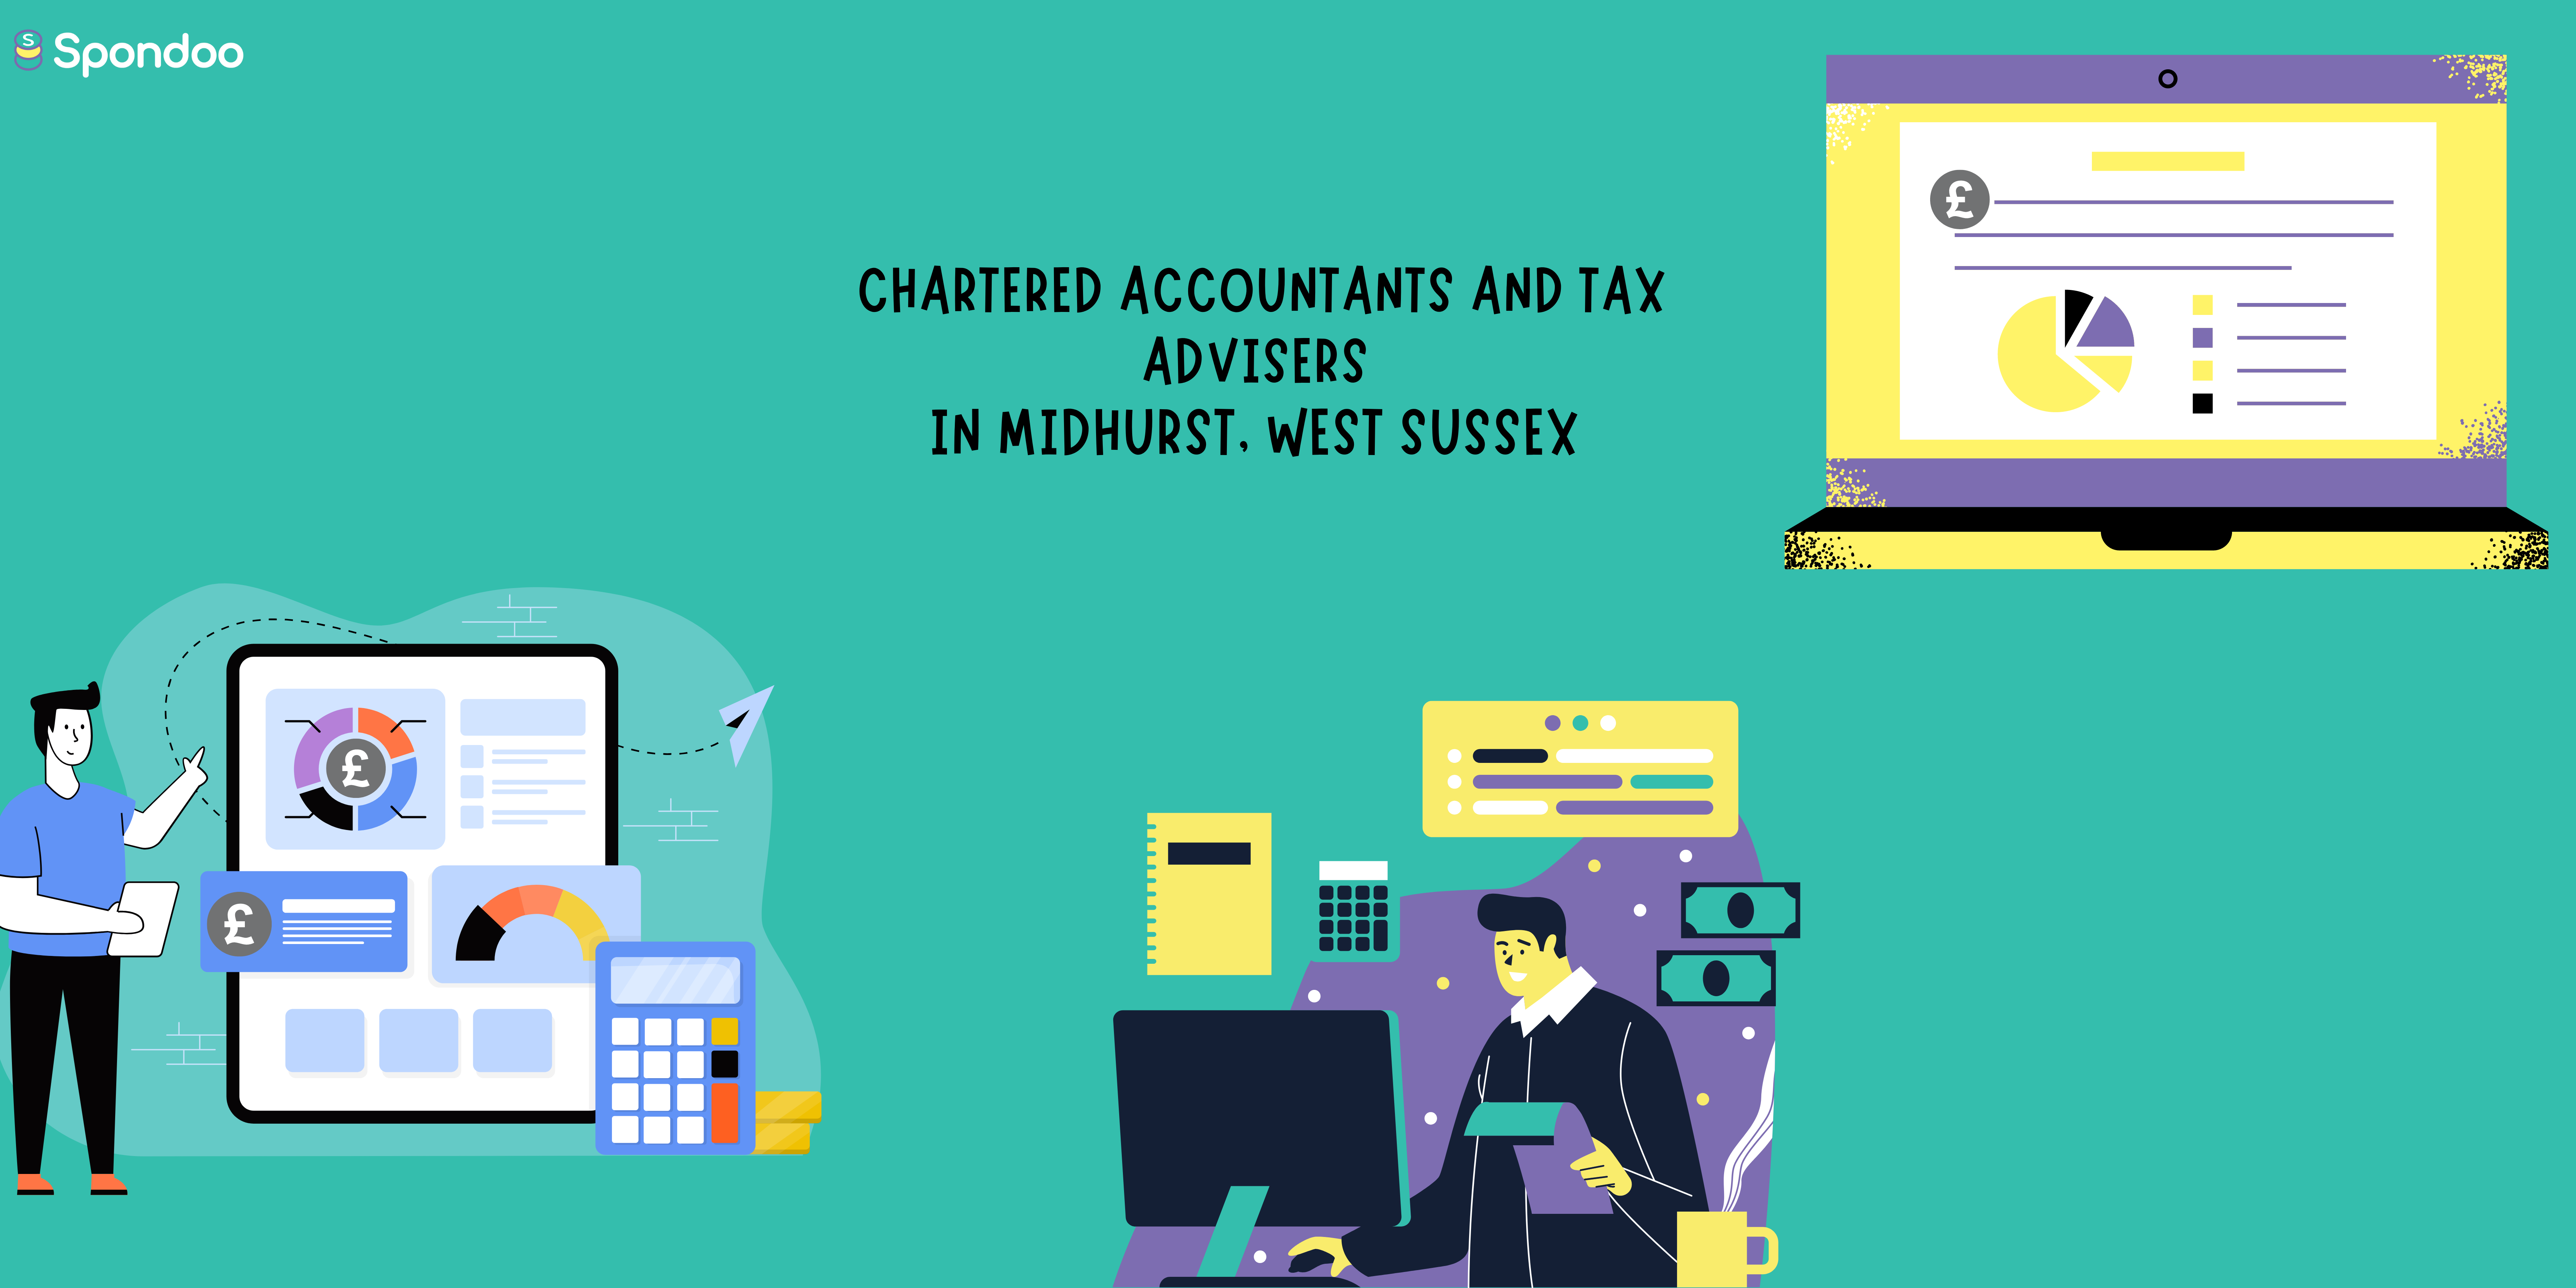 Chartered accountants and tax advisers in Midhurst, West Sussex